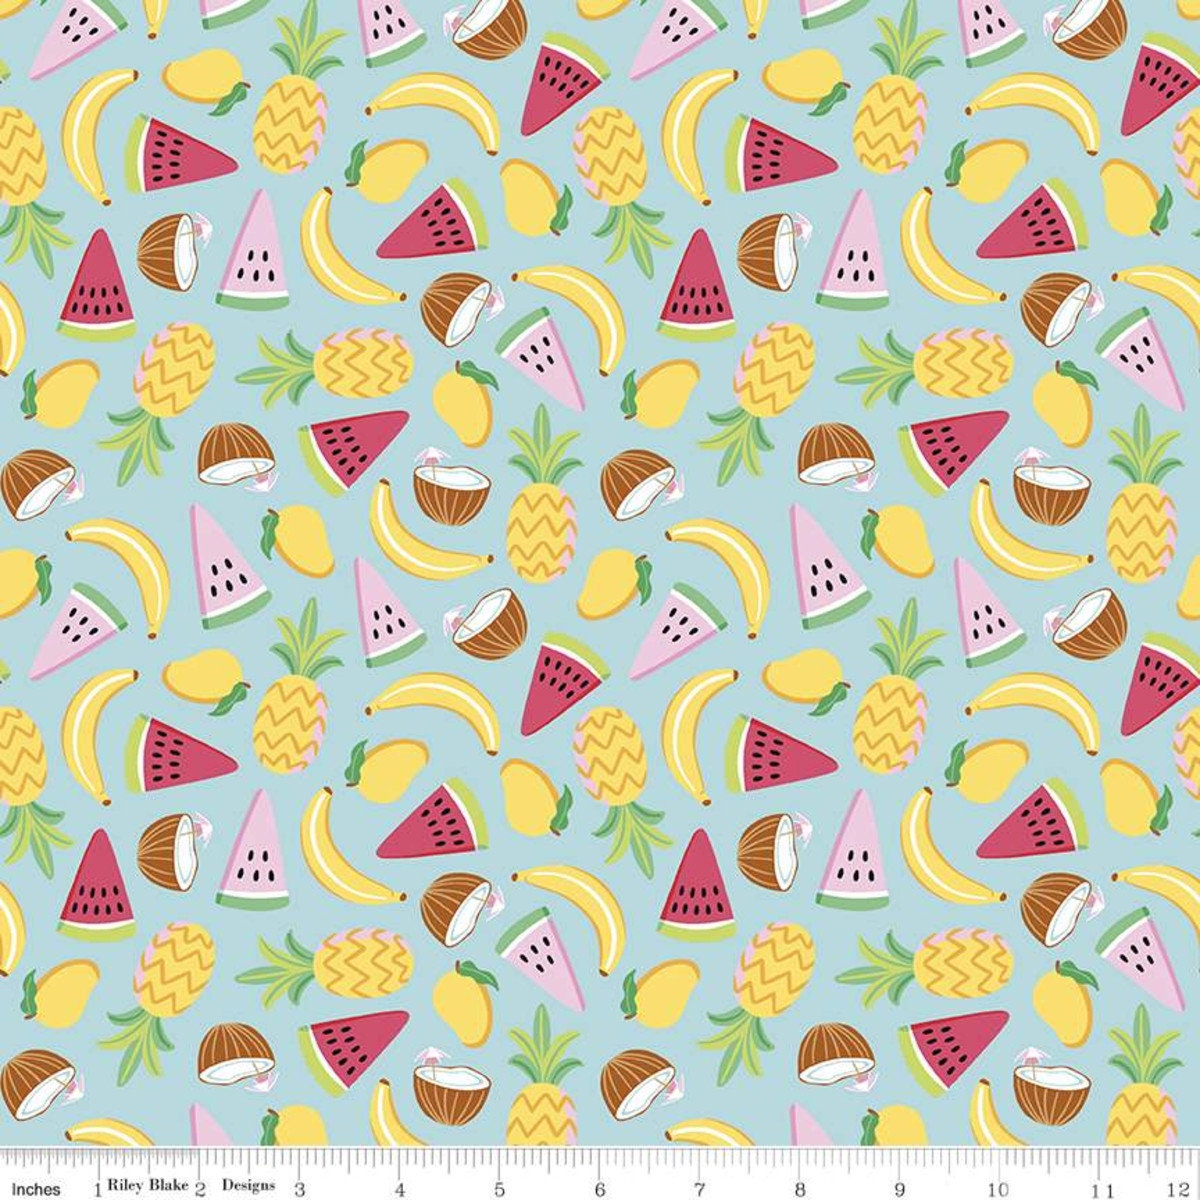 Lemons, pineapples, melons and coconuts, tropical fruit cotton fabric - Rainbow Fruits by Riley Blake